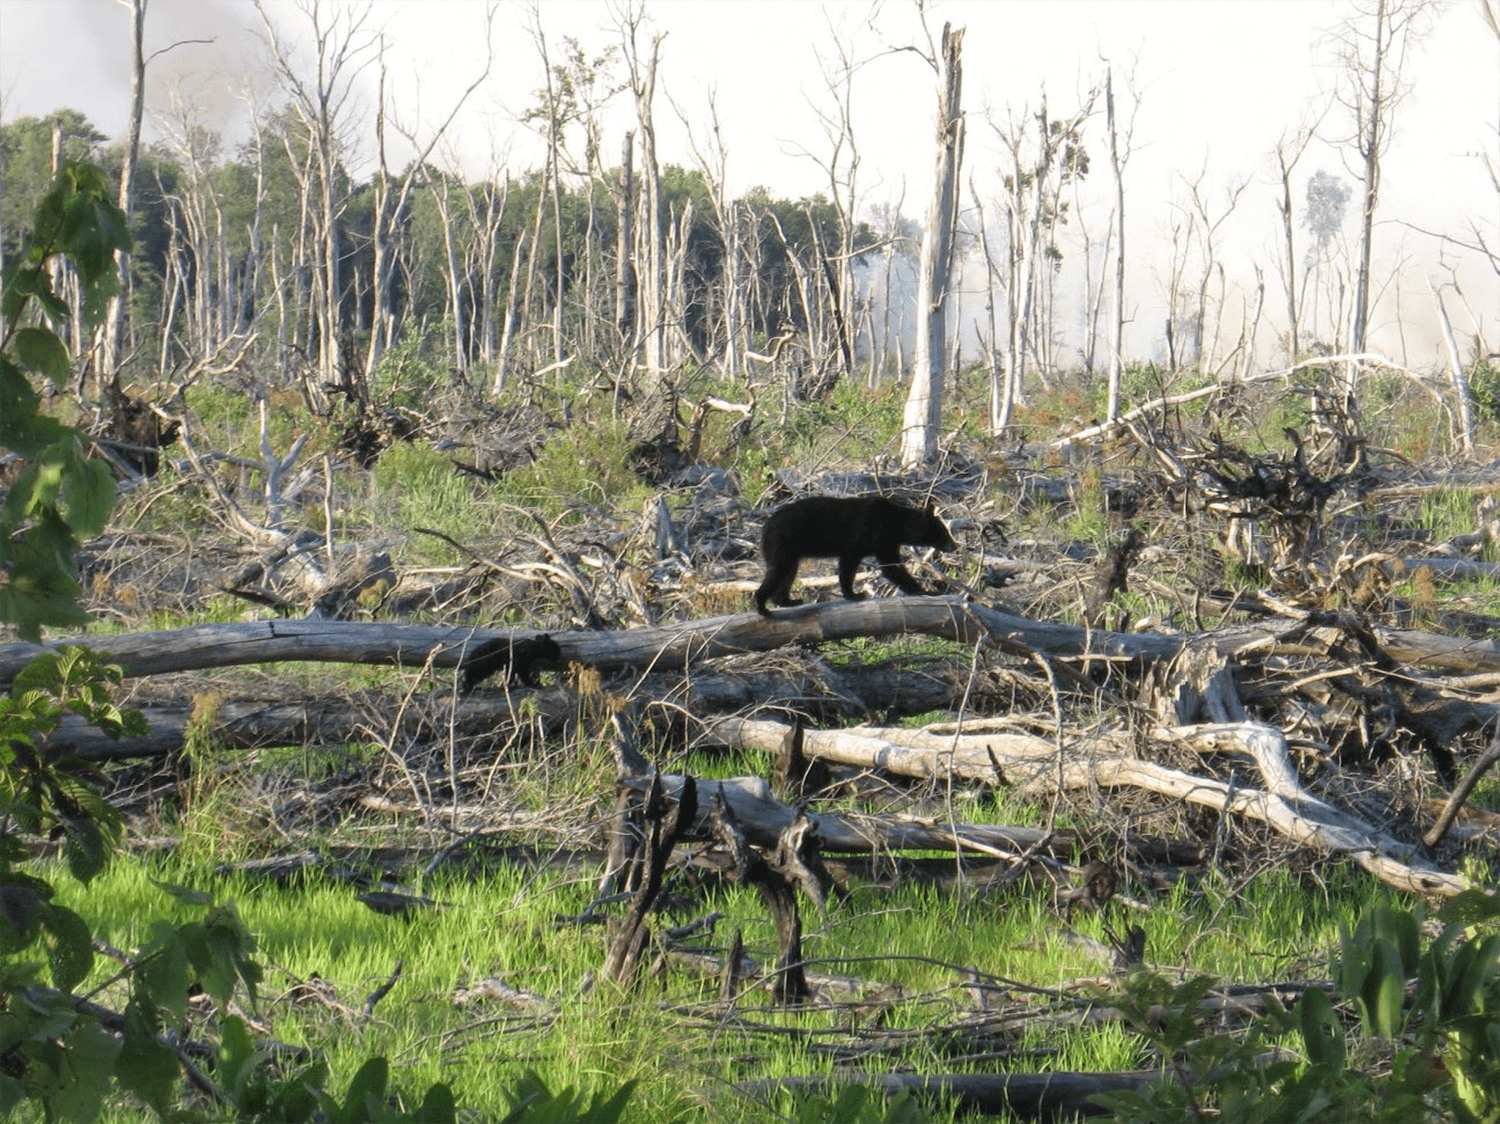 A black bear and cub travel along the edge of a burn zone.